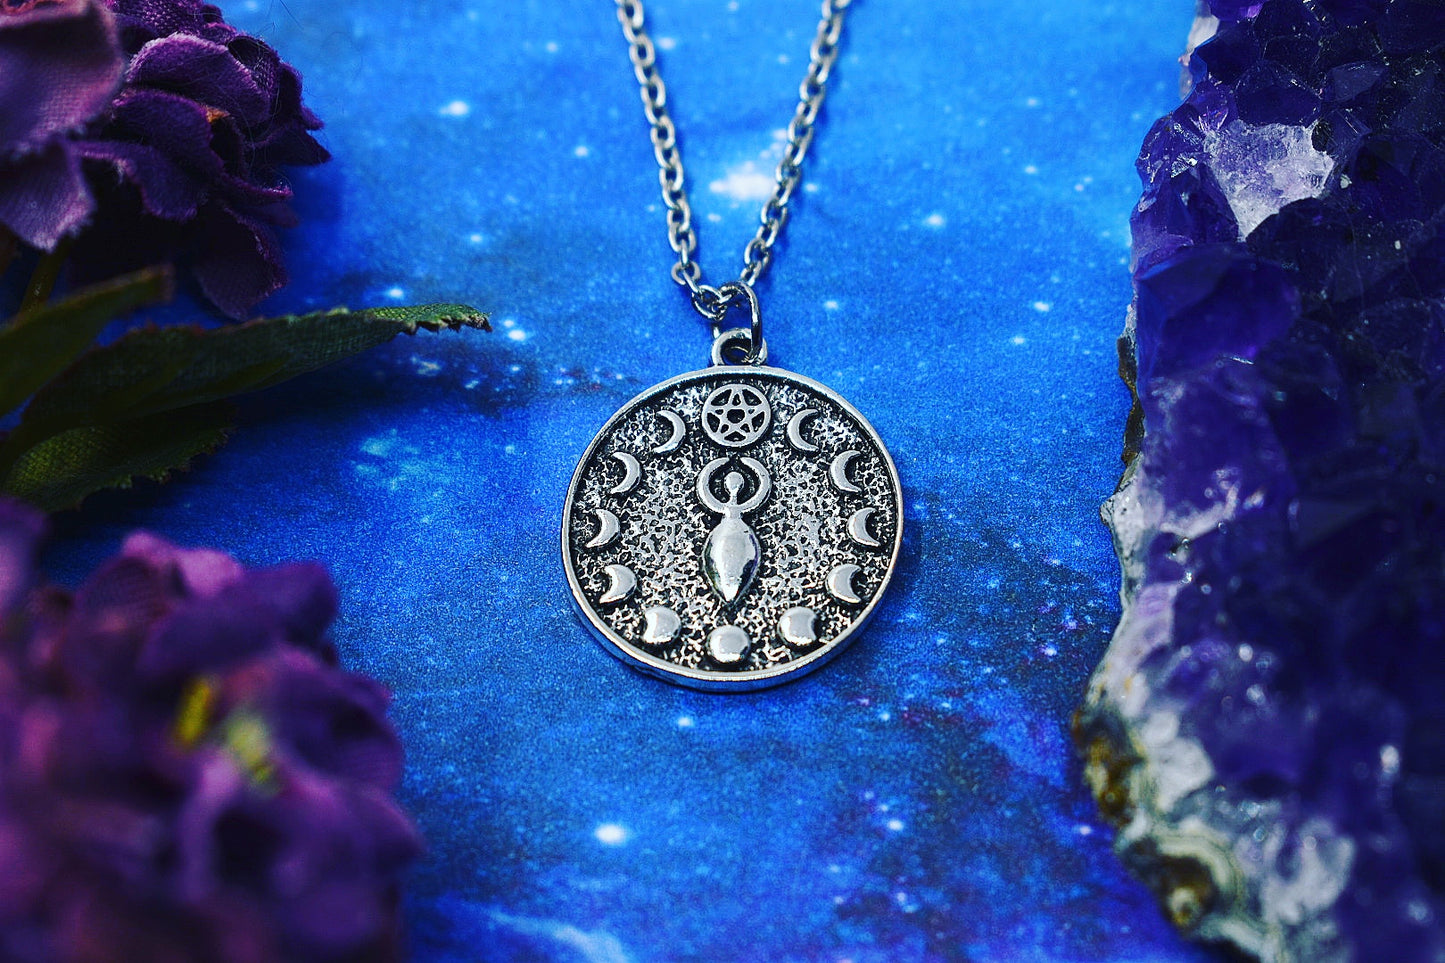 Goddess pendant, moon phase and pentacle, wicca jewelry, witch, goth